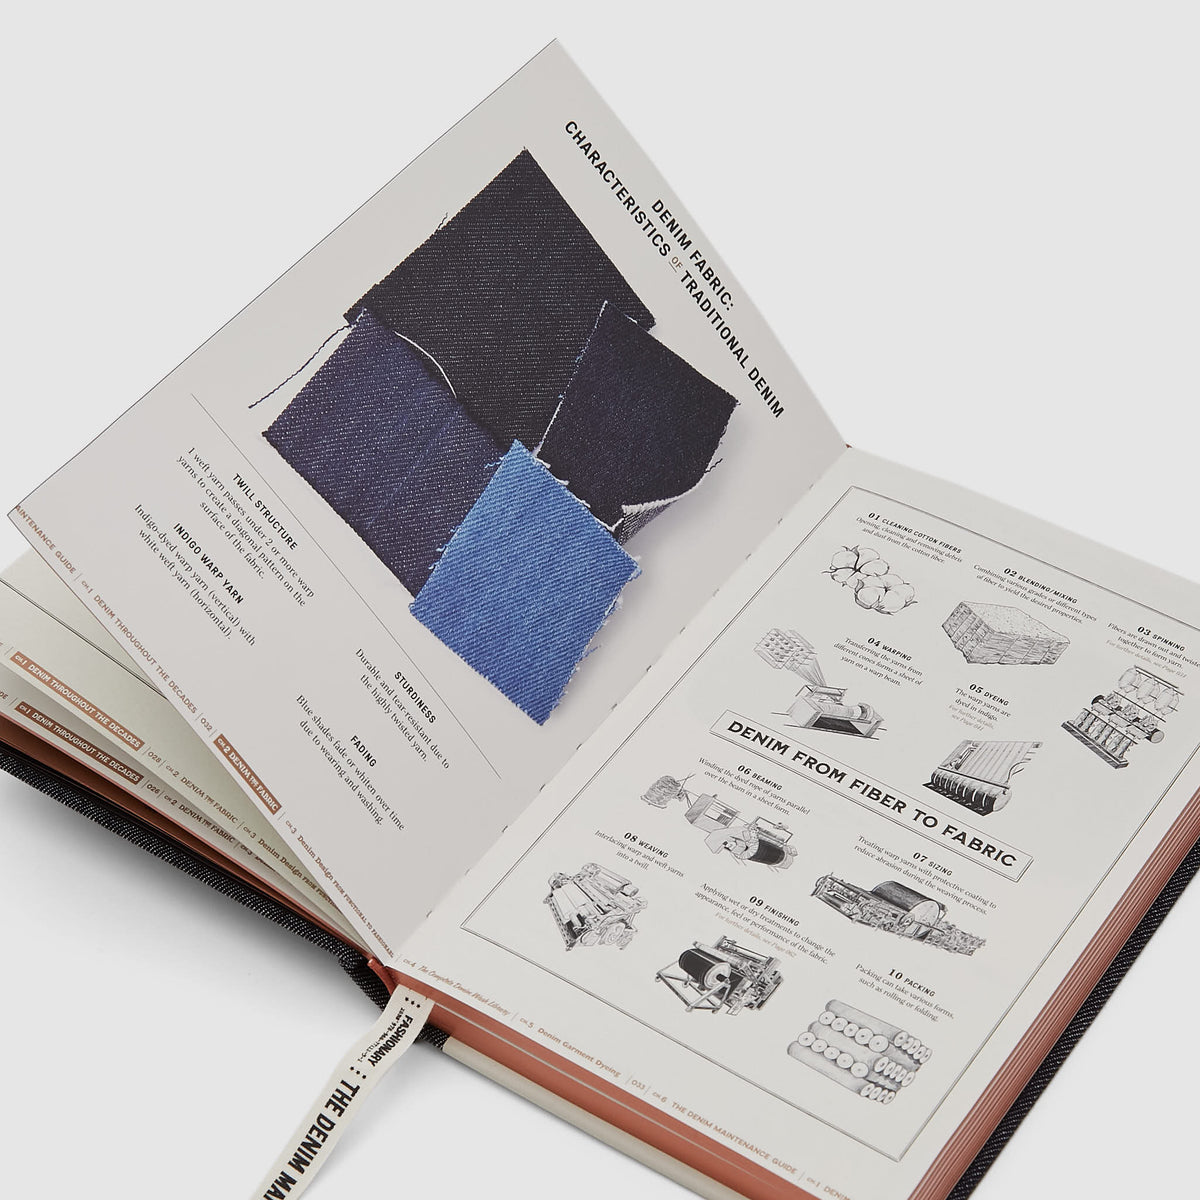 The Denim Manual – a Complete Visual Guide for the Denim Industry